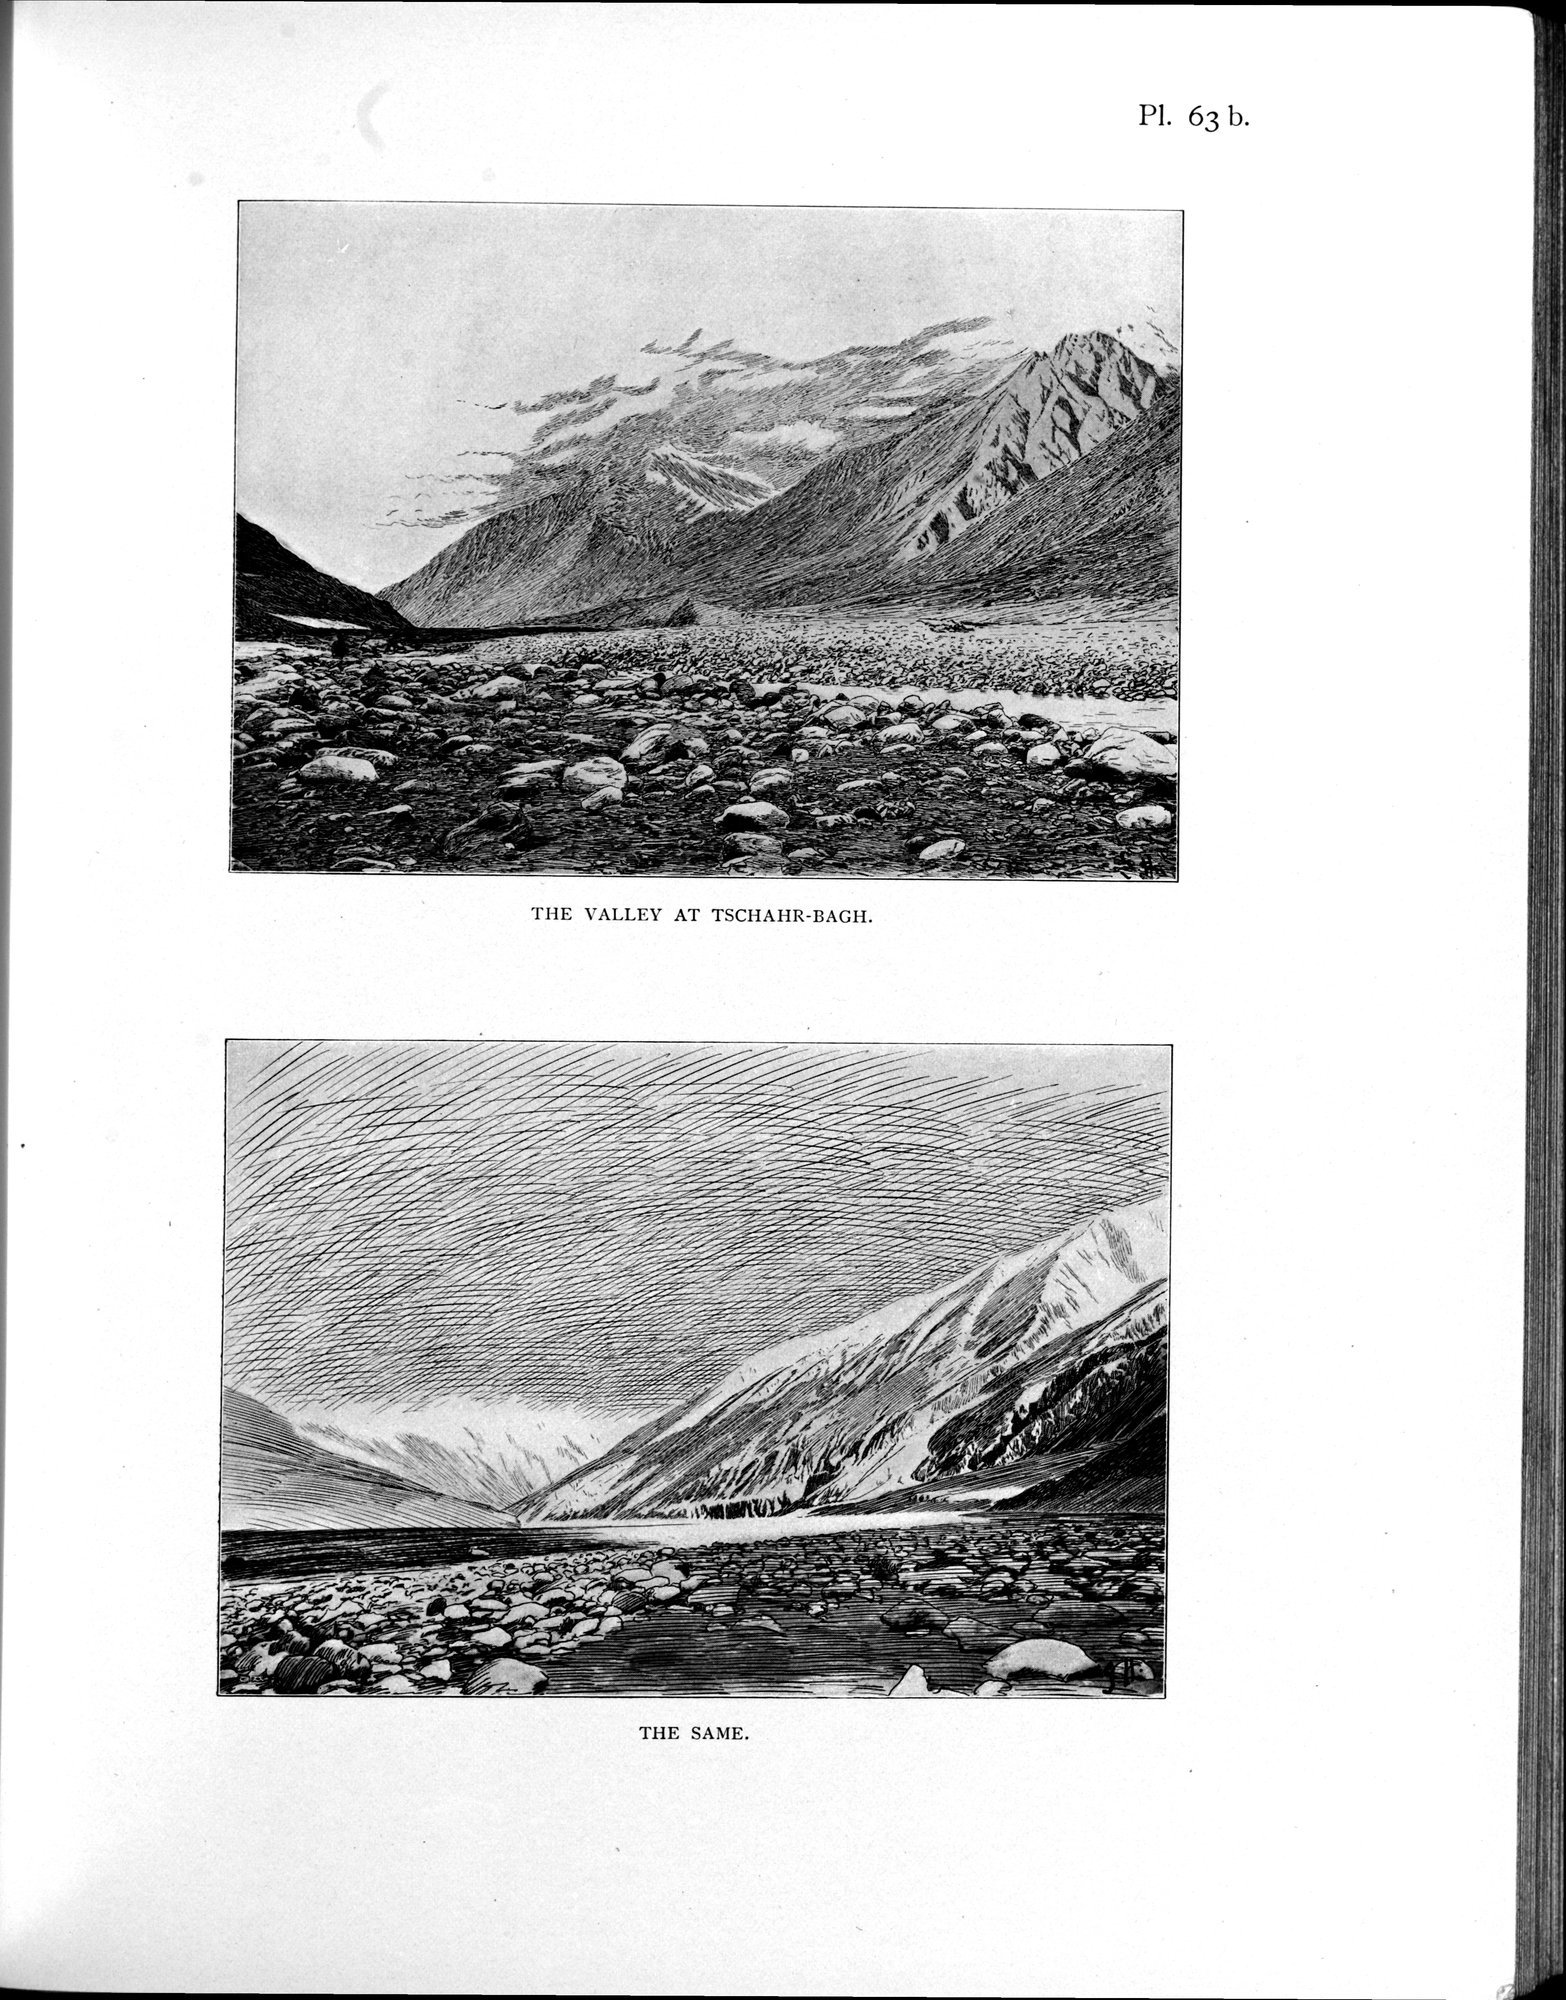 Scientific Results of a Journey in Central Asia, 1899-1902 : vol.4 / 577 ページ（白黒高解像度画像）